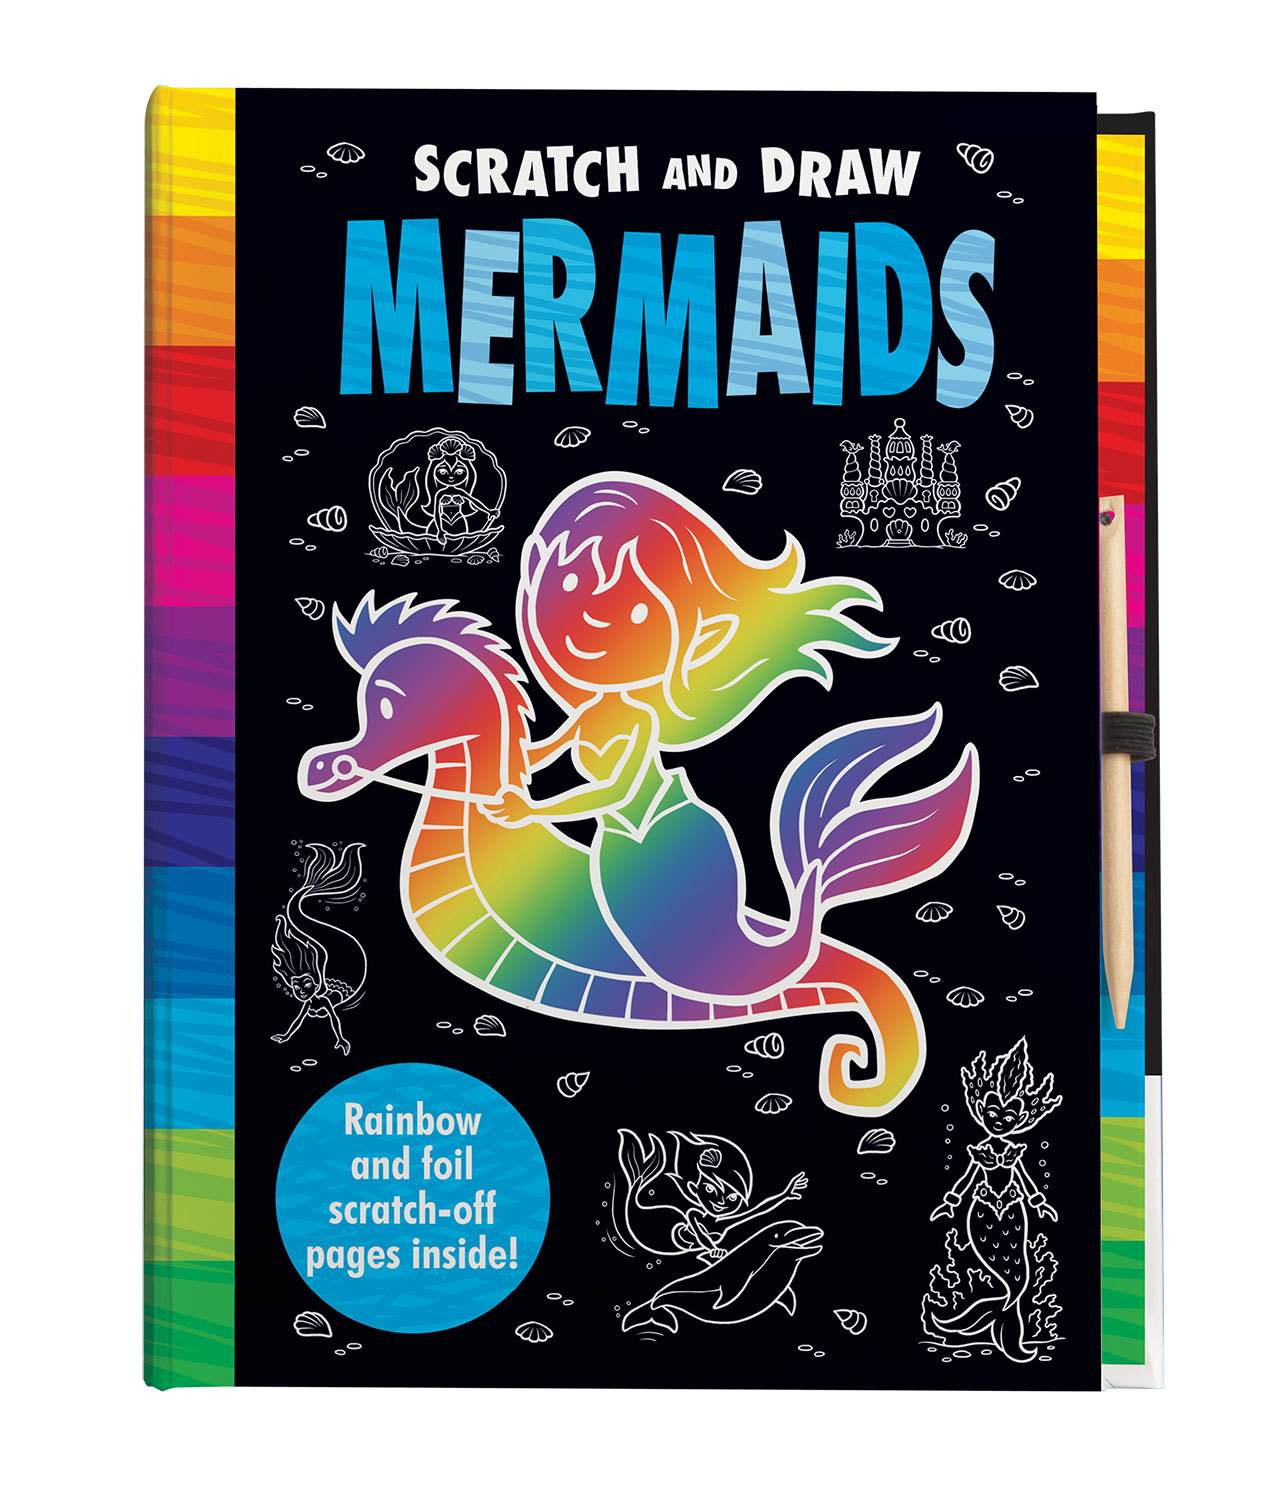 SCRATCH AND DRAW MERMAIDS